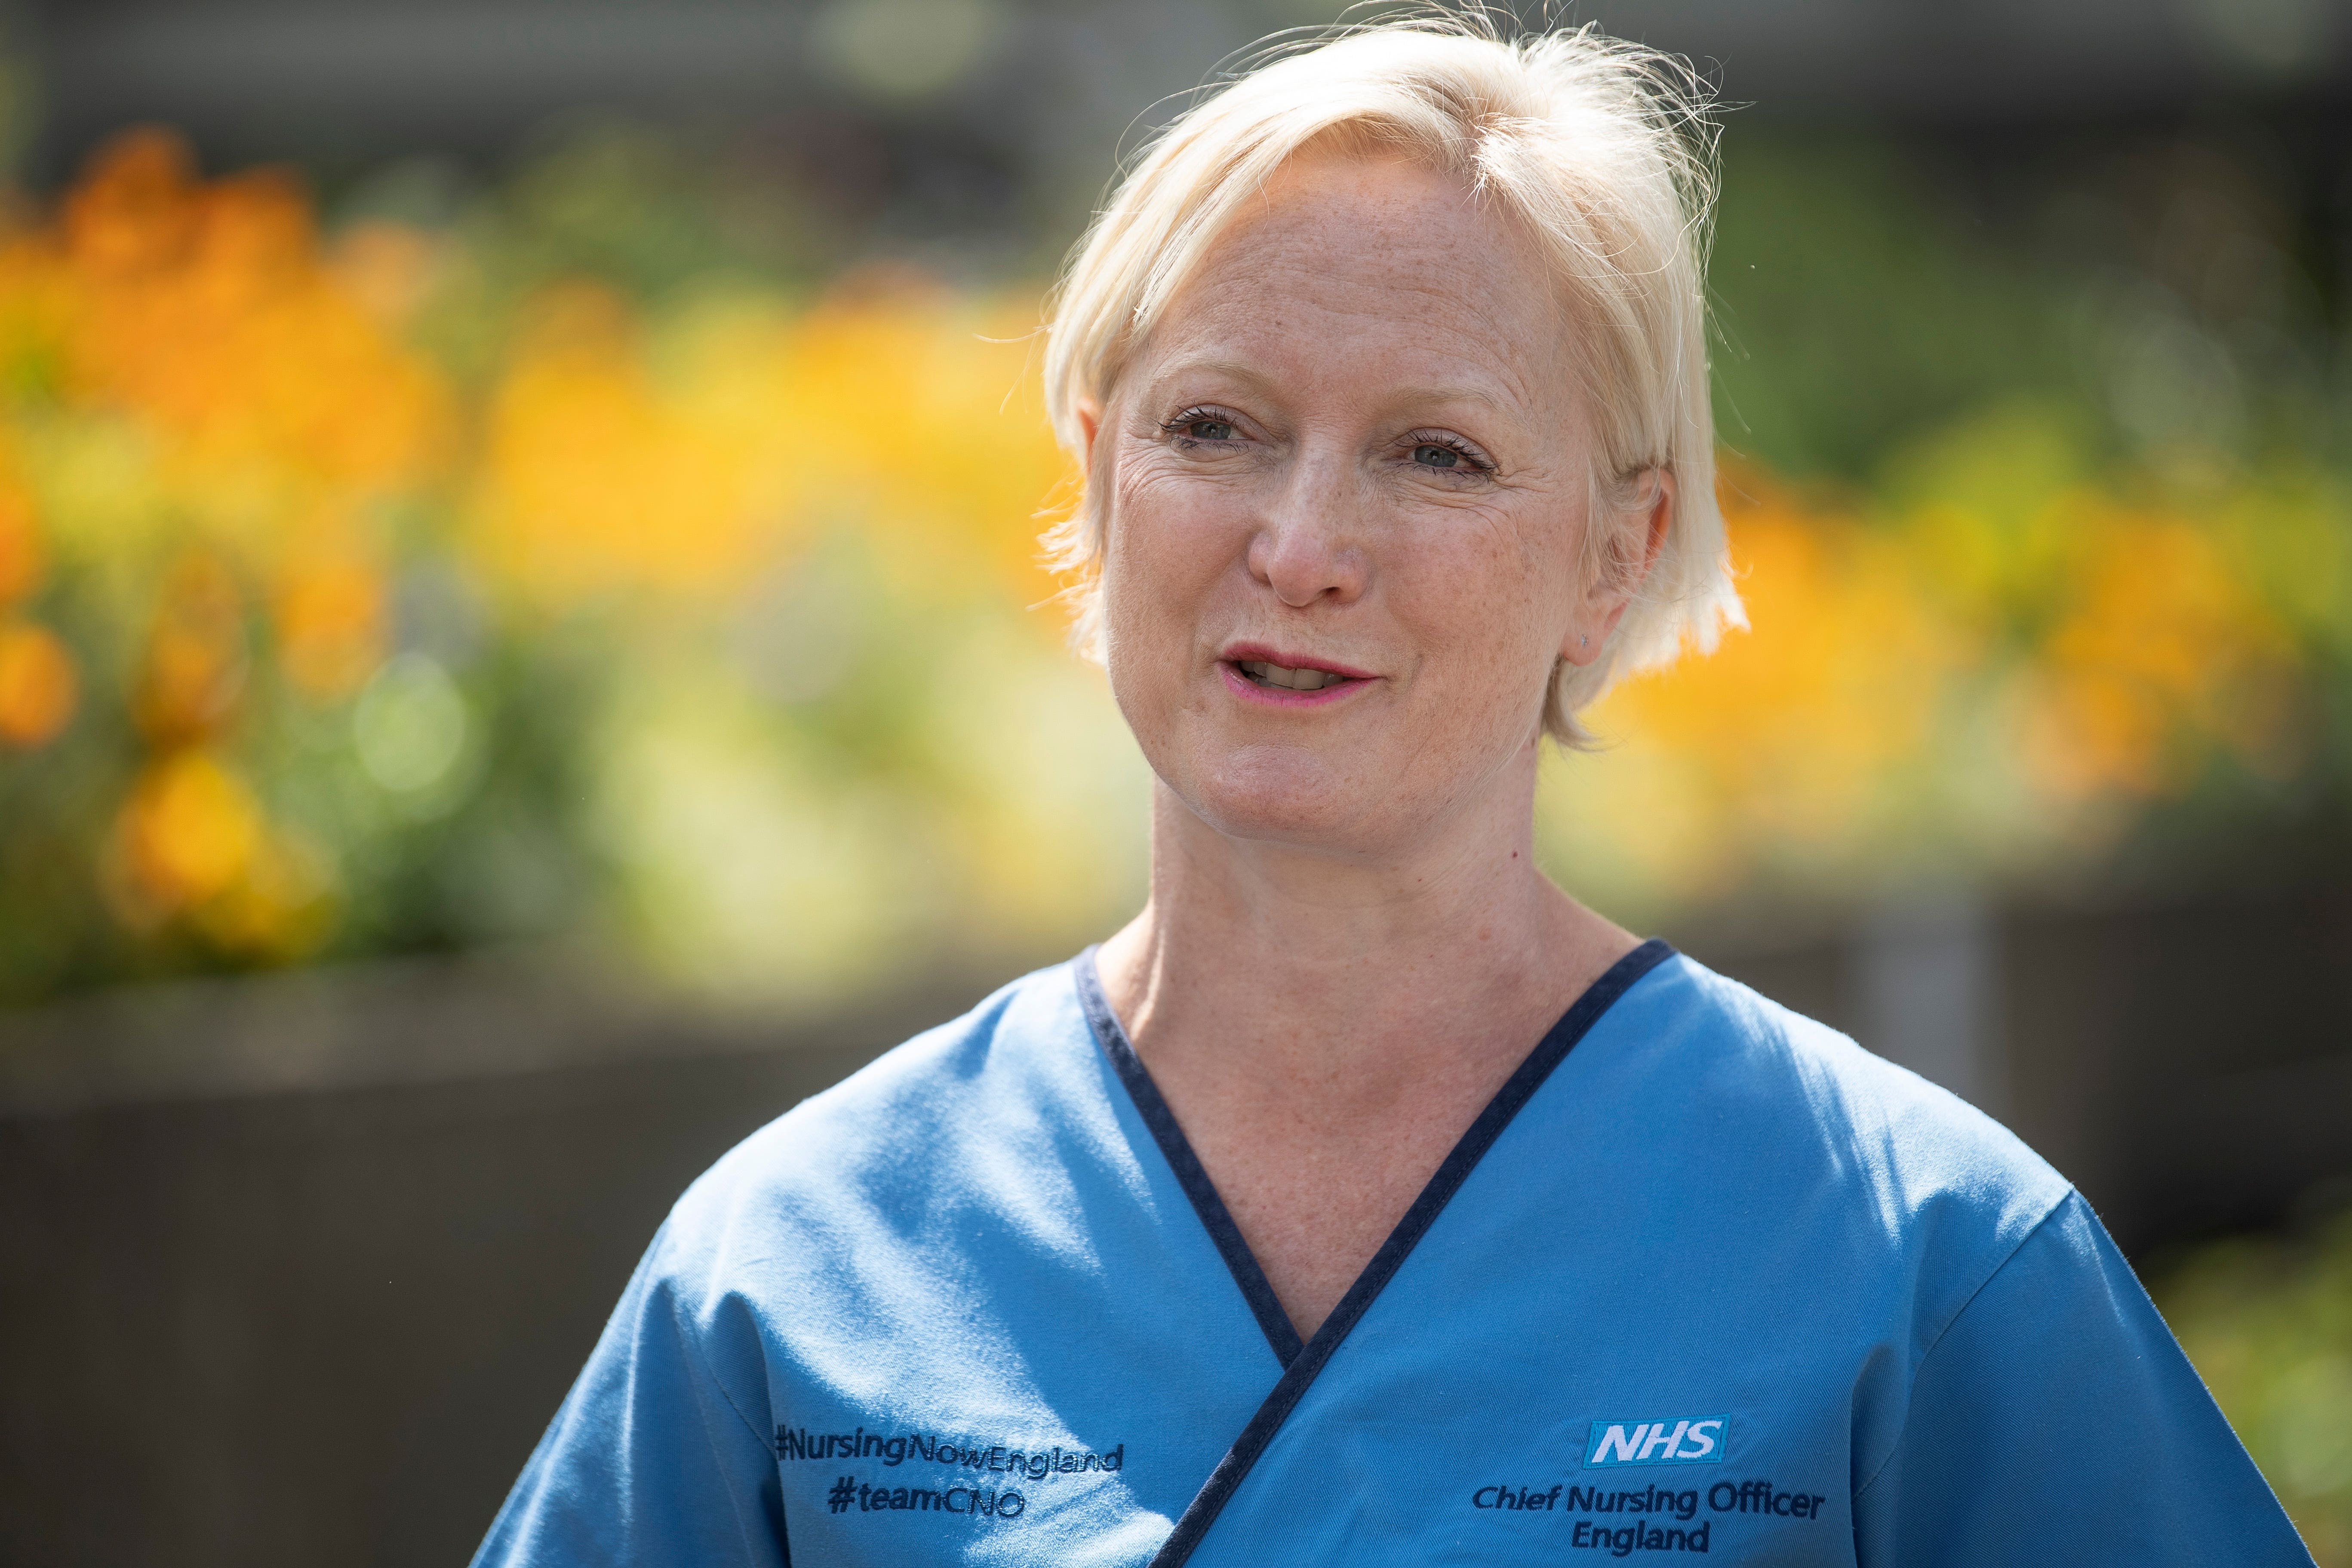 NHS chief nurse Dame Ruth May, who protested with nurses in London on Thursday